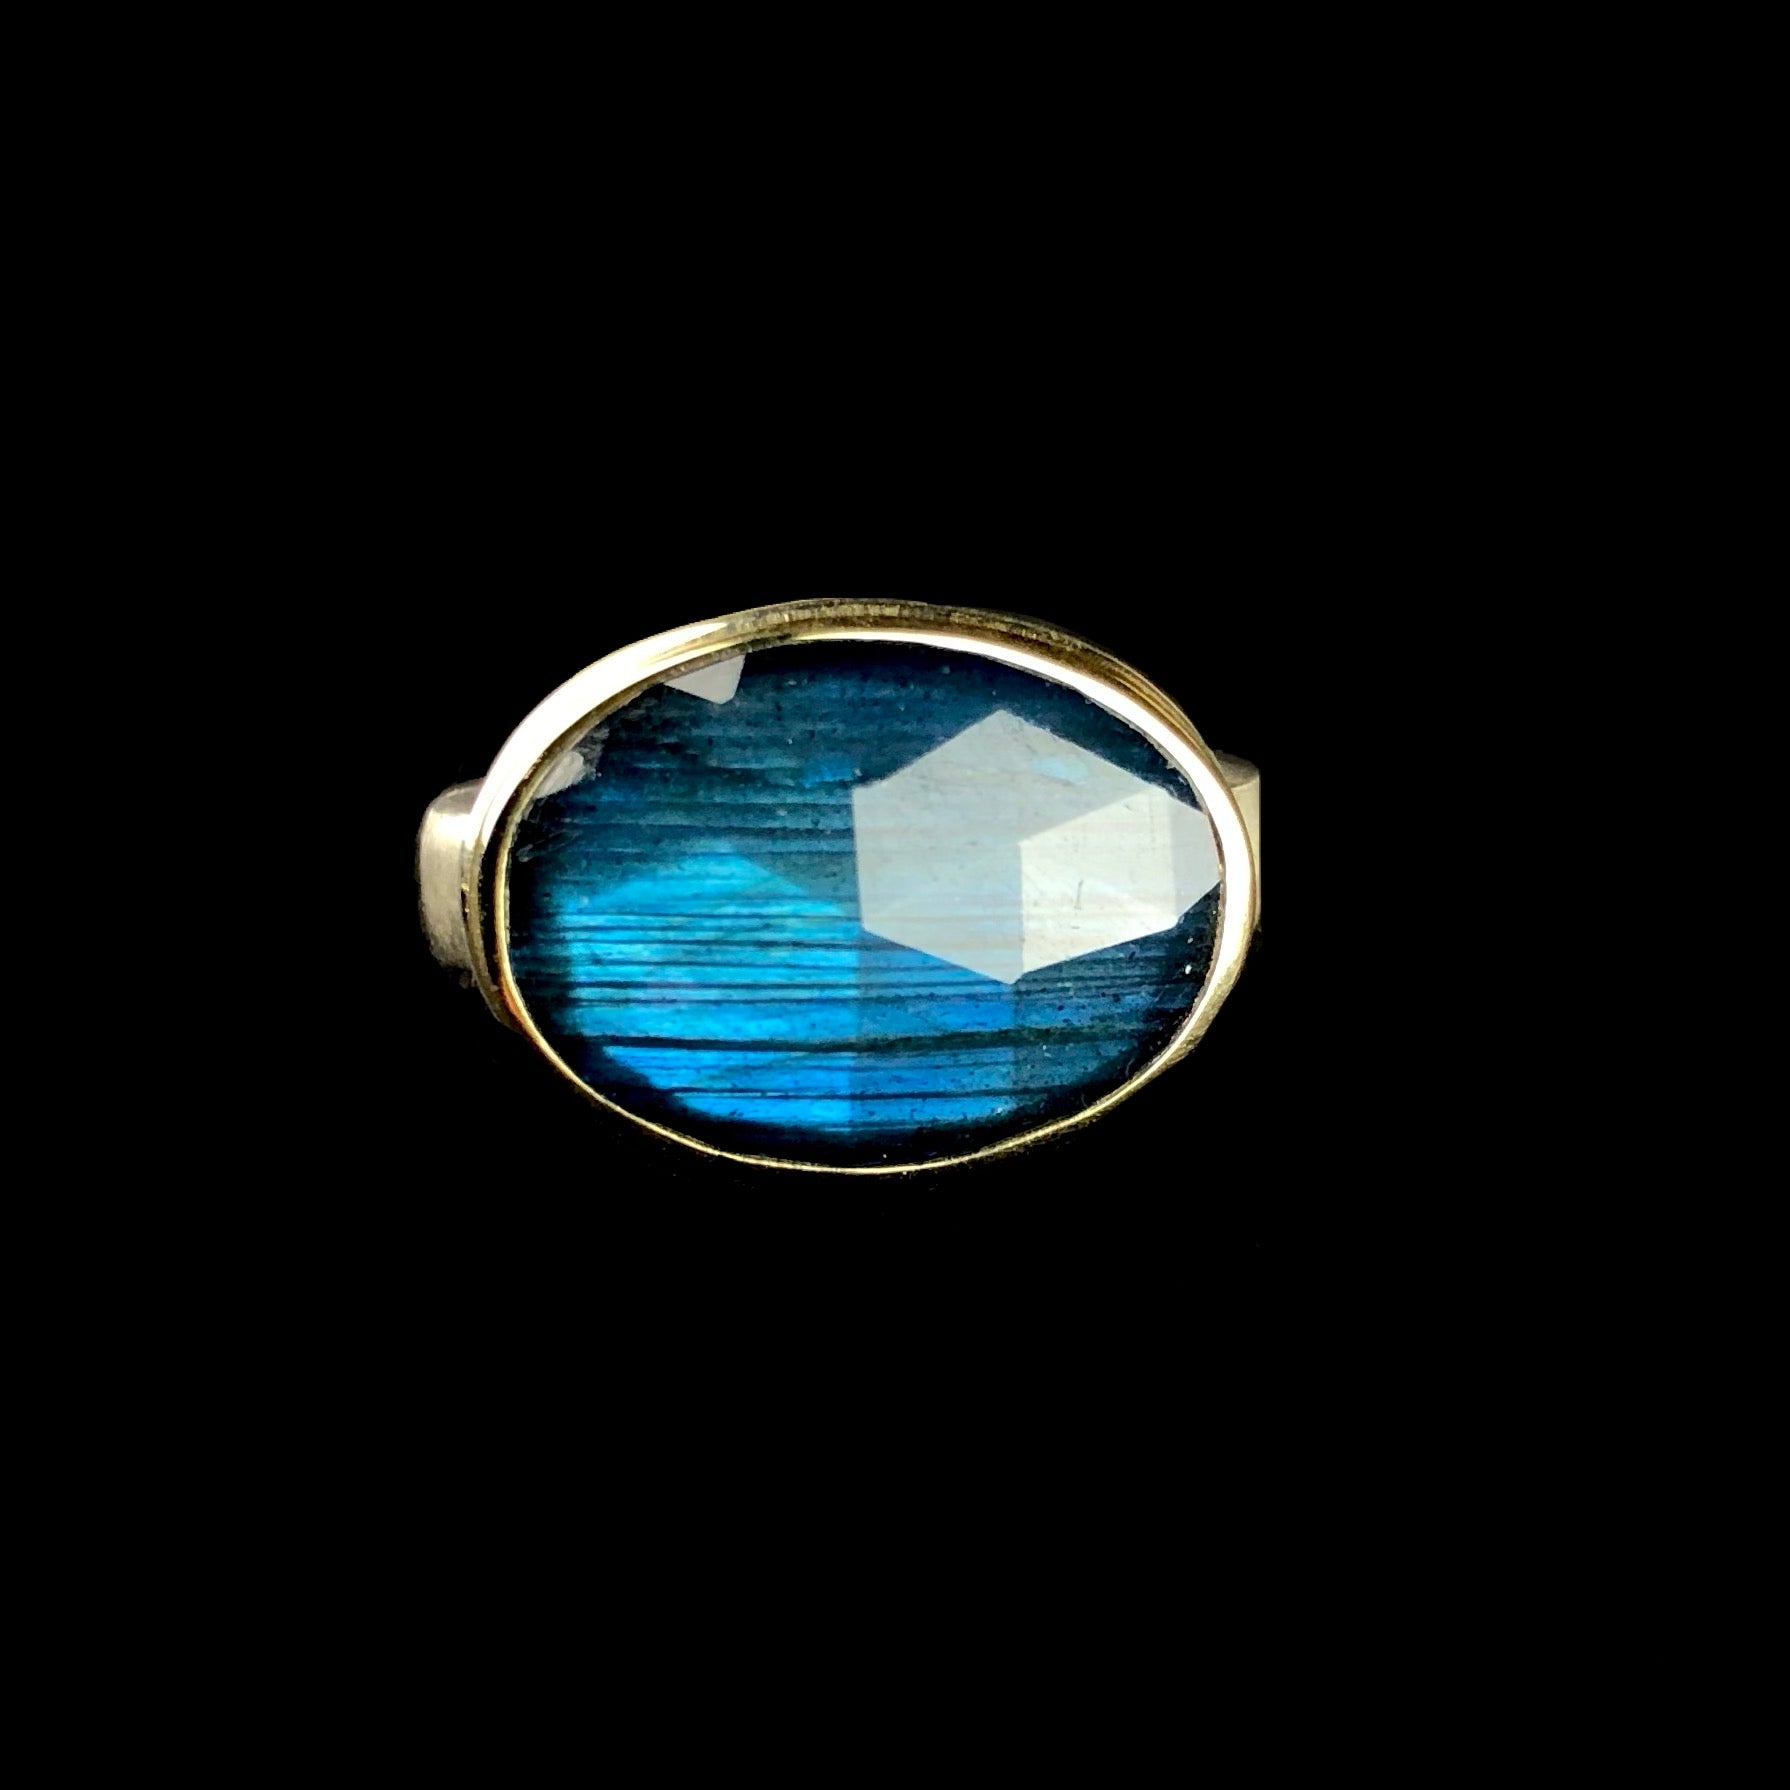 Front view of oval iridescent greenish blue labradorite stone ring